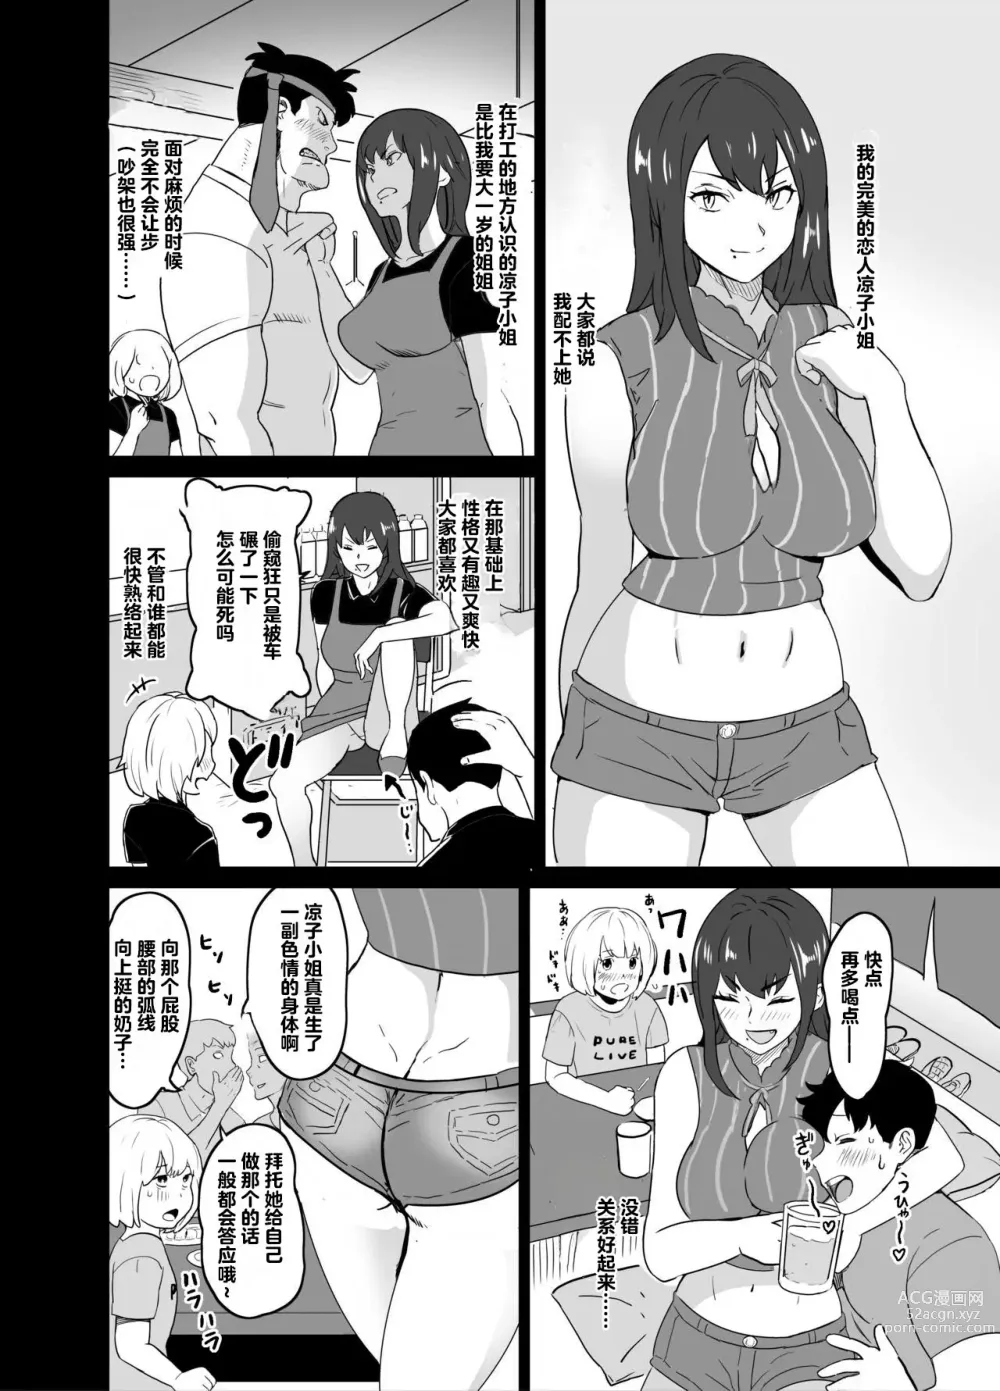 Page 6 of doujinshi older girlfriend who reports cheating while flirting love